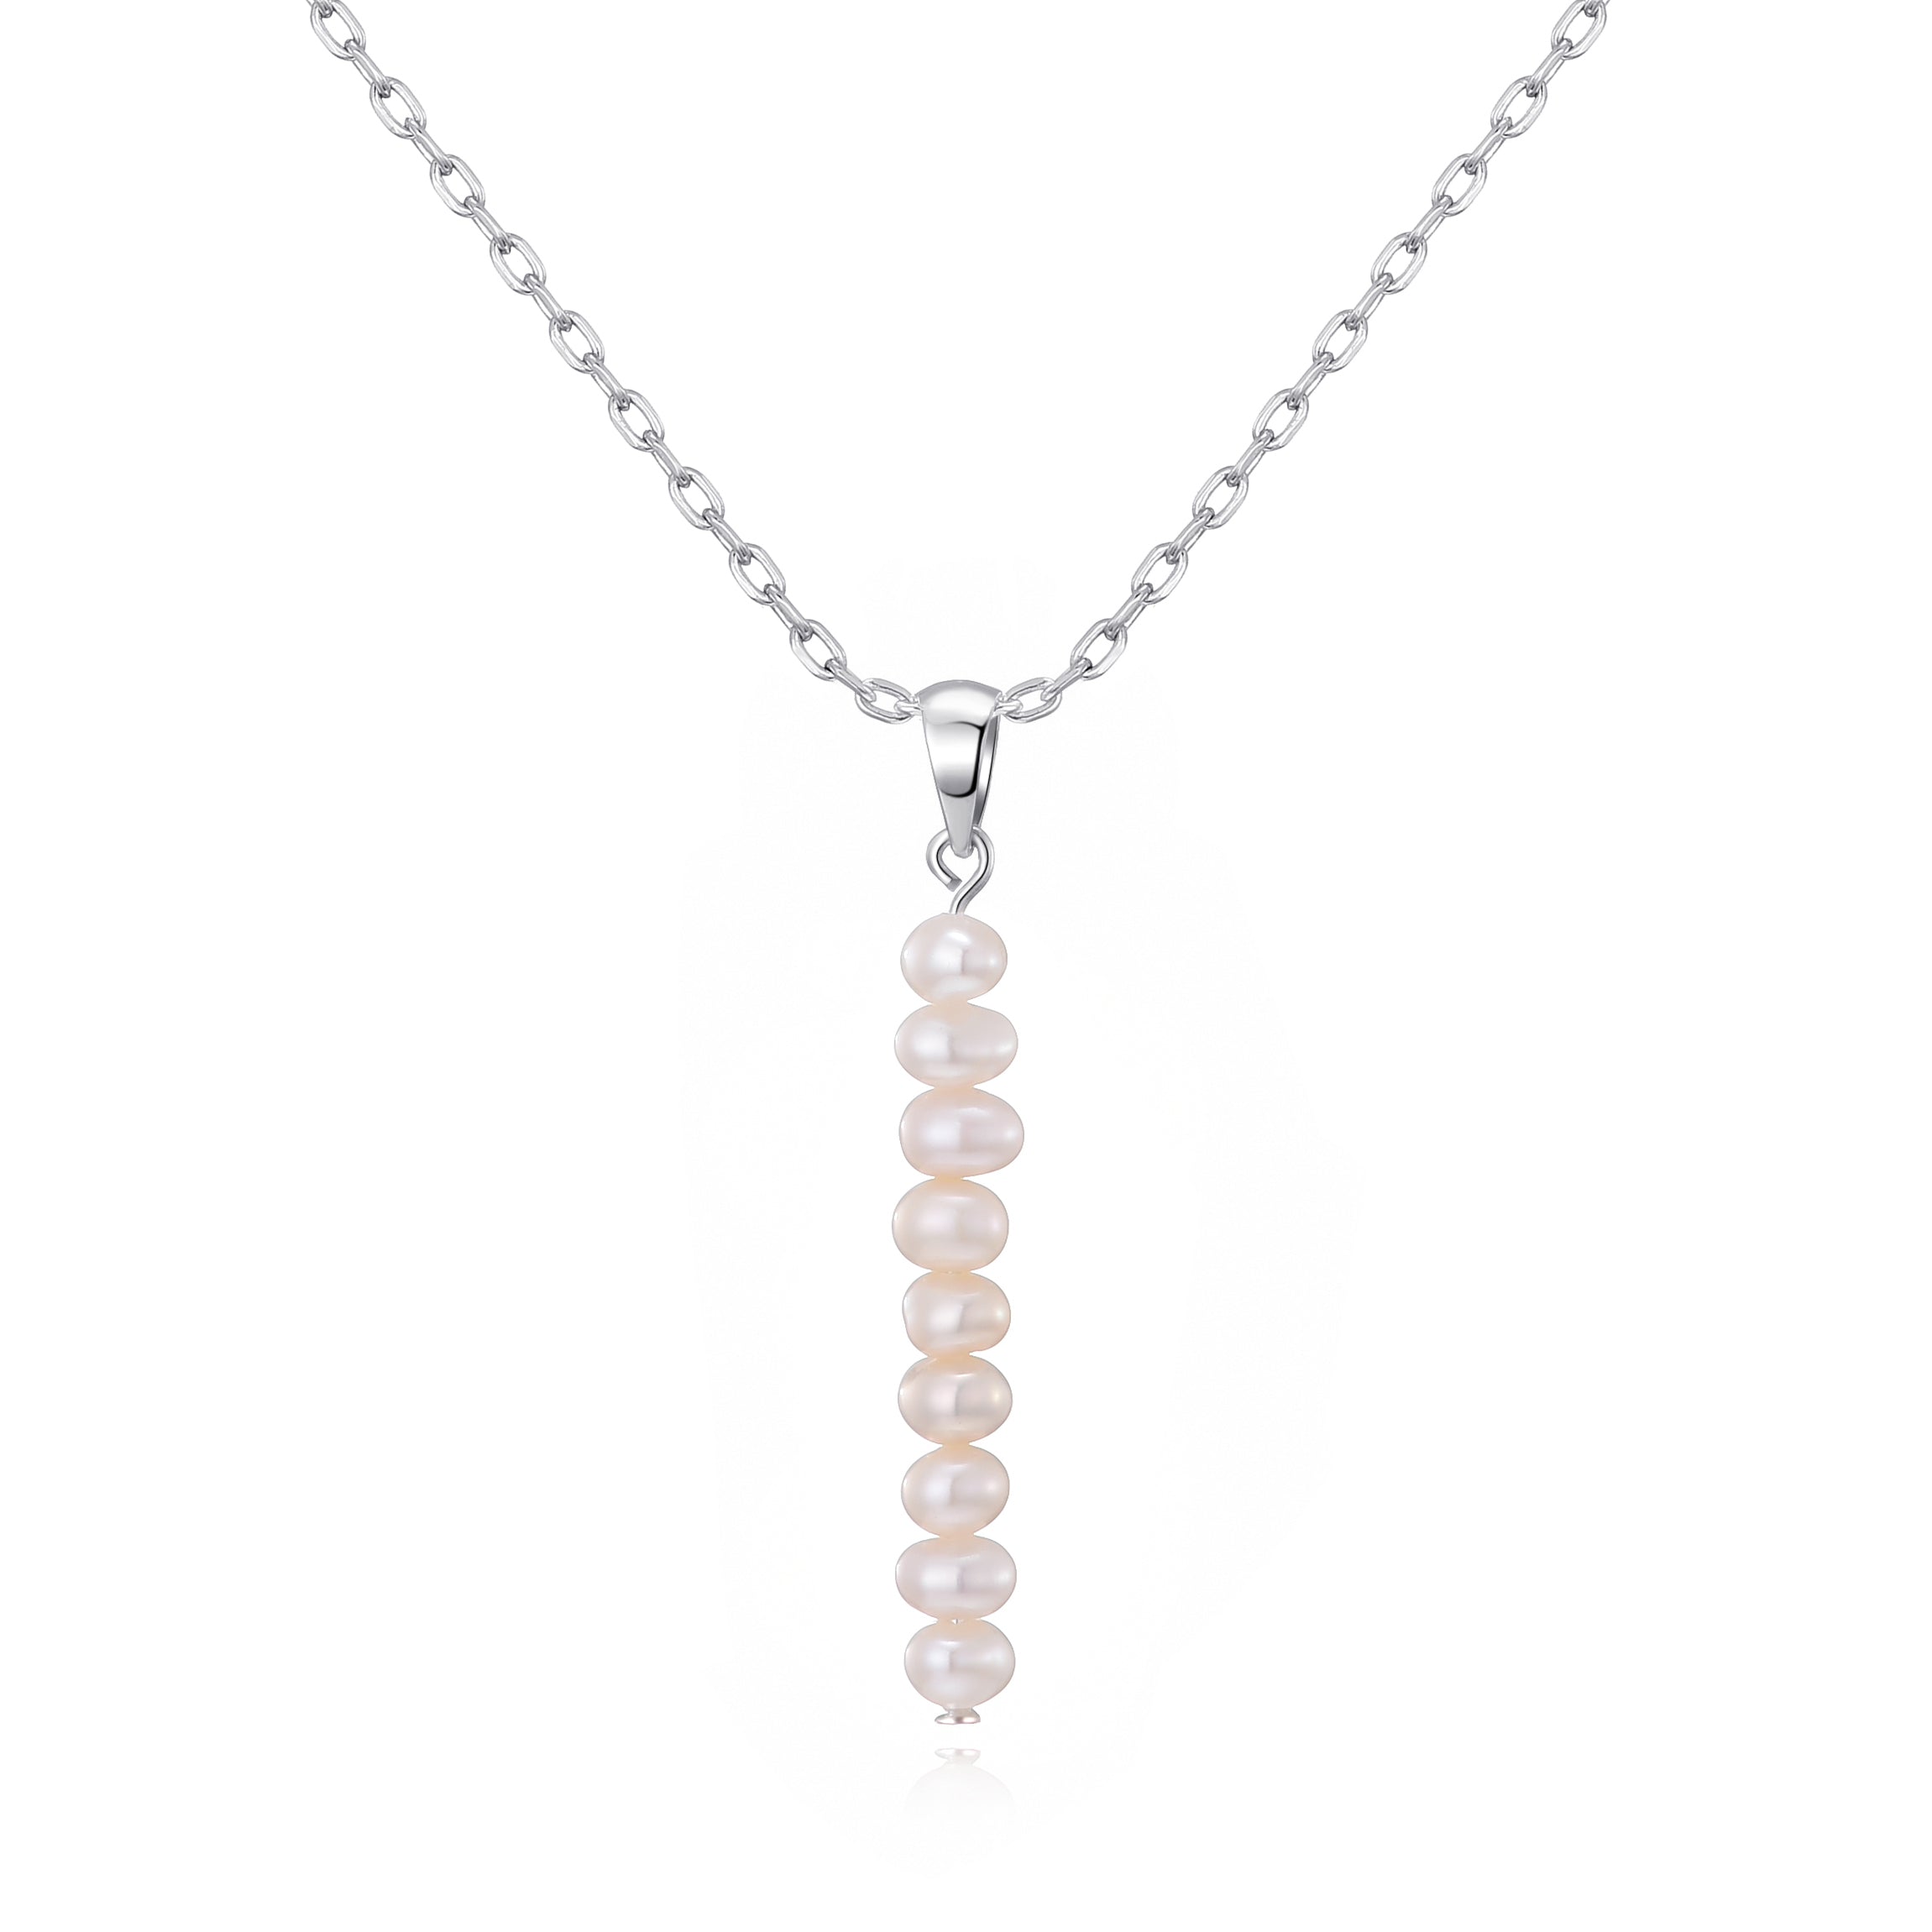 Silver Plated Freshwater Pearl Drop Necklace by Philip Jones Jewellery